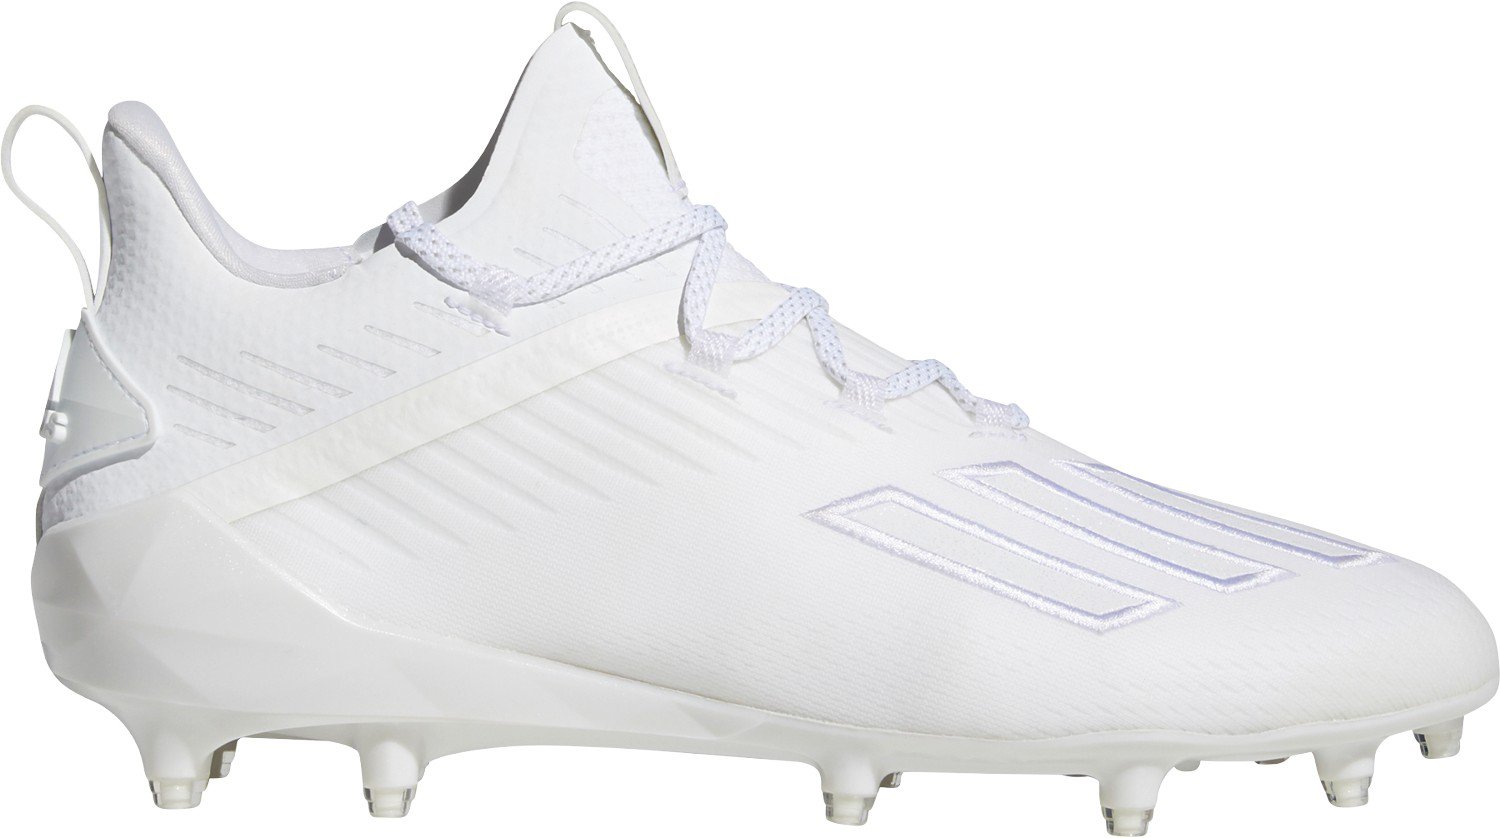 cleats from academy